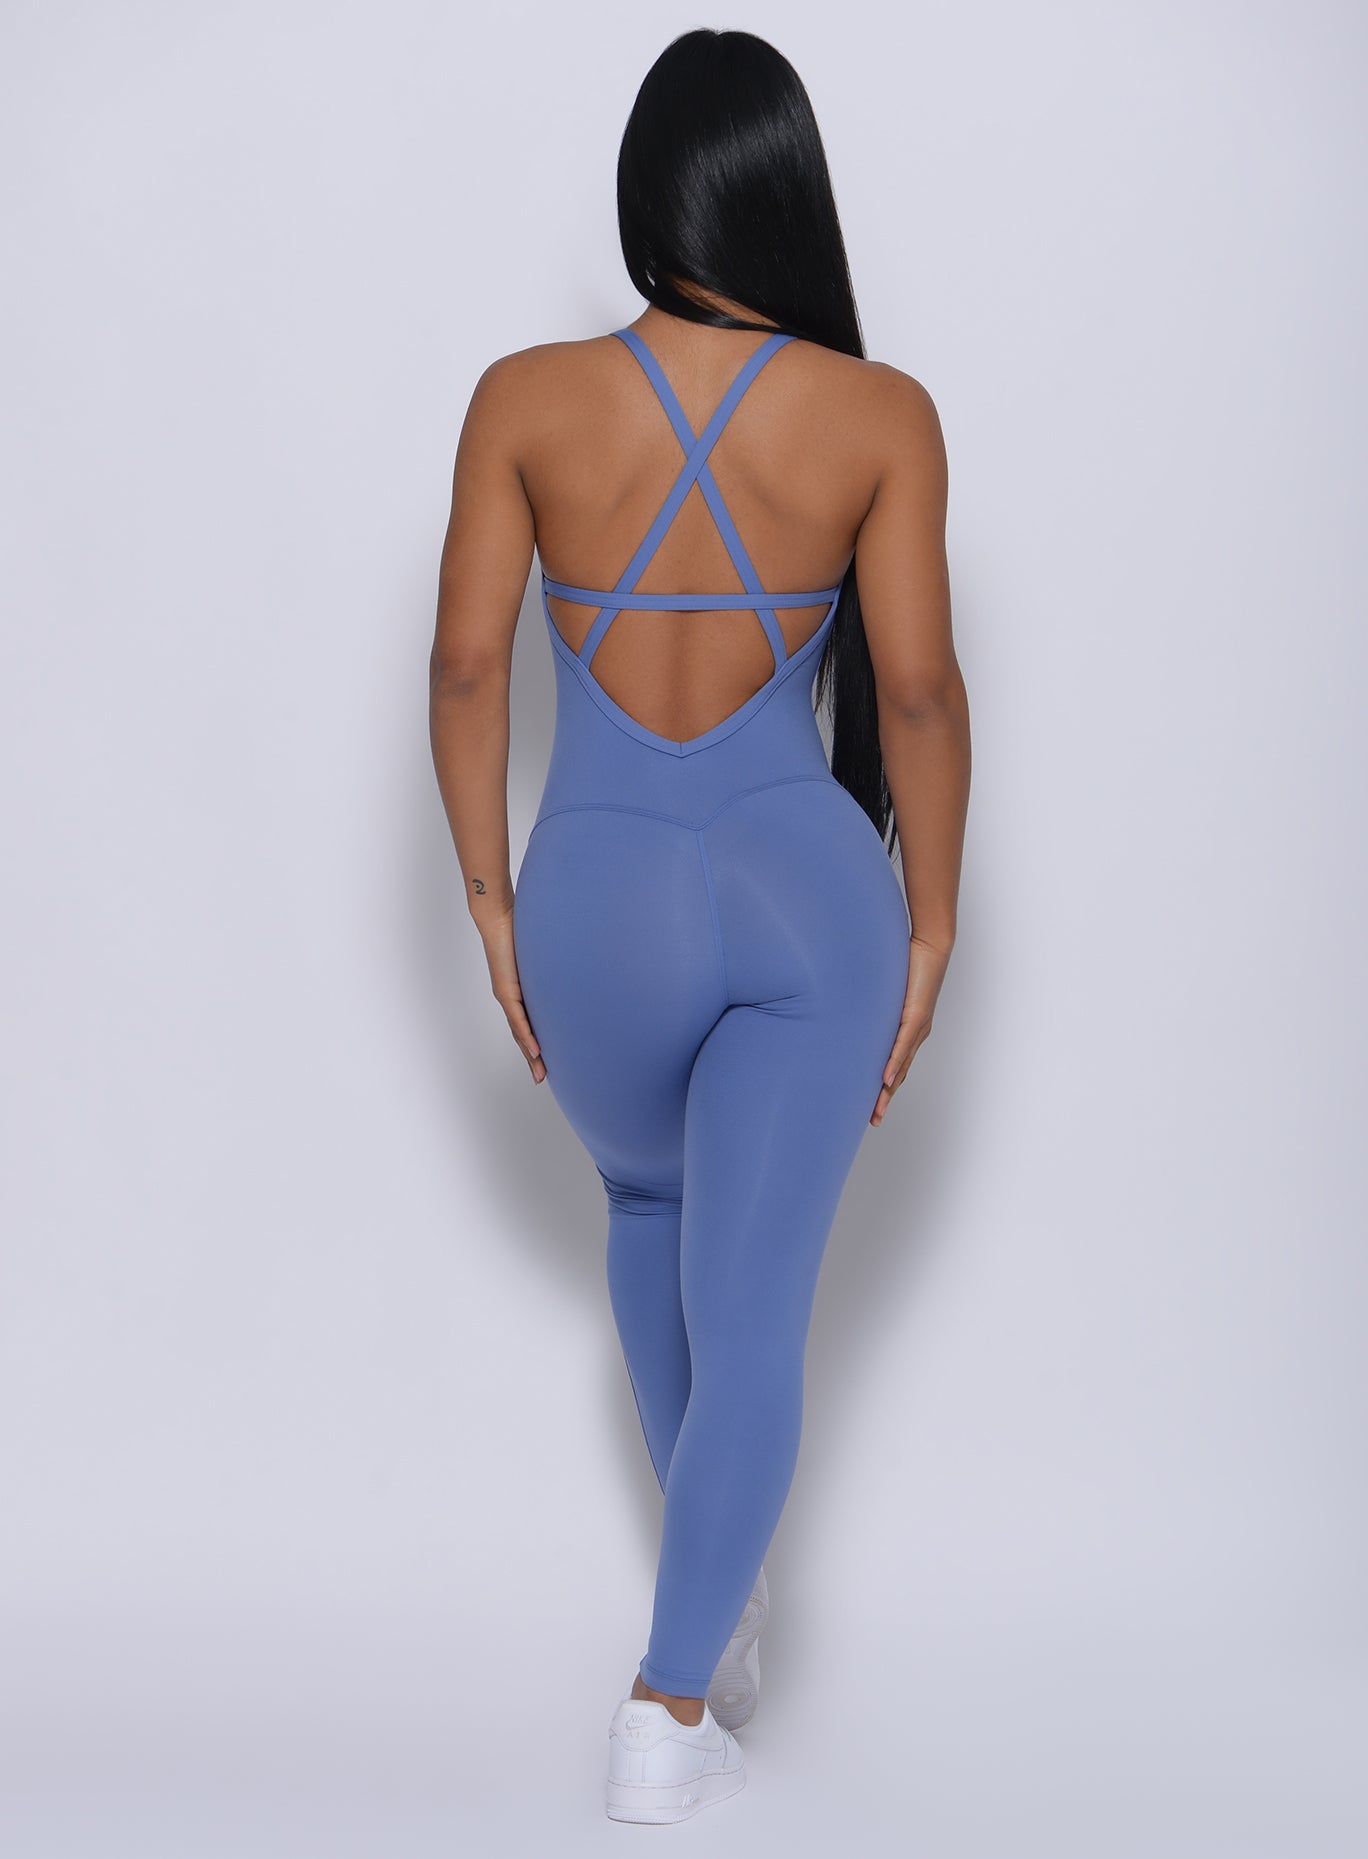 Back profile picture of a model in our sculpted bodysuit in denim blue color